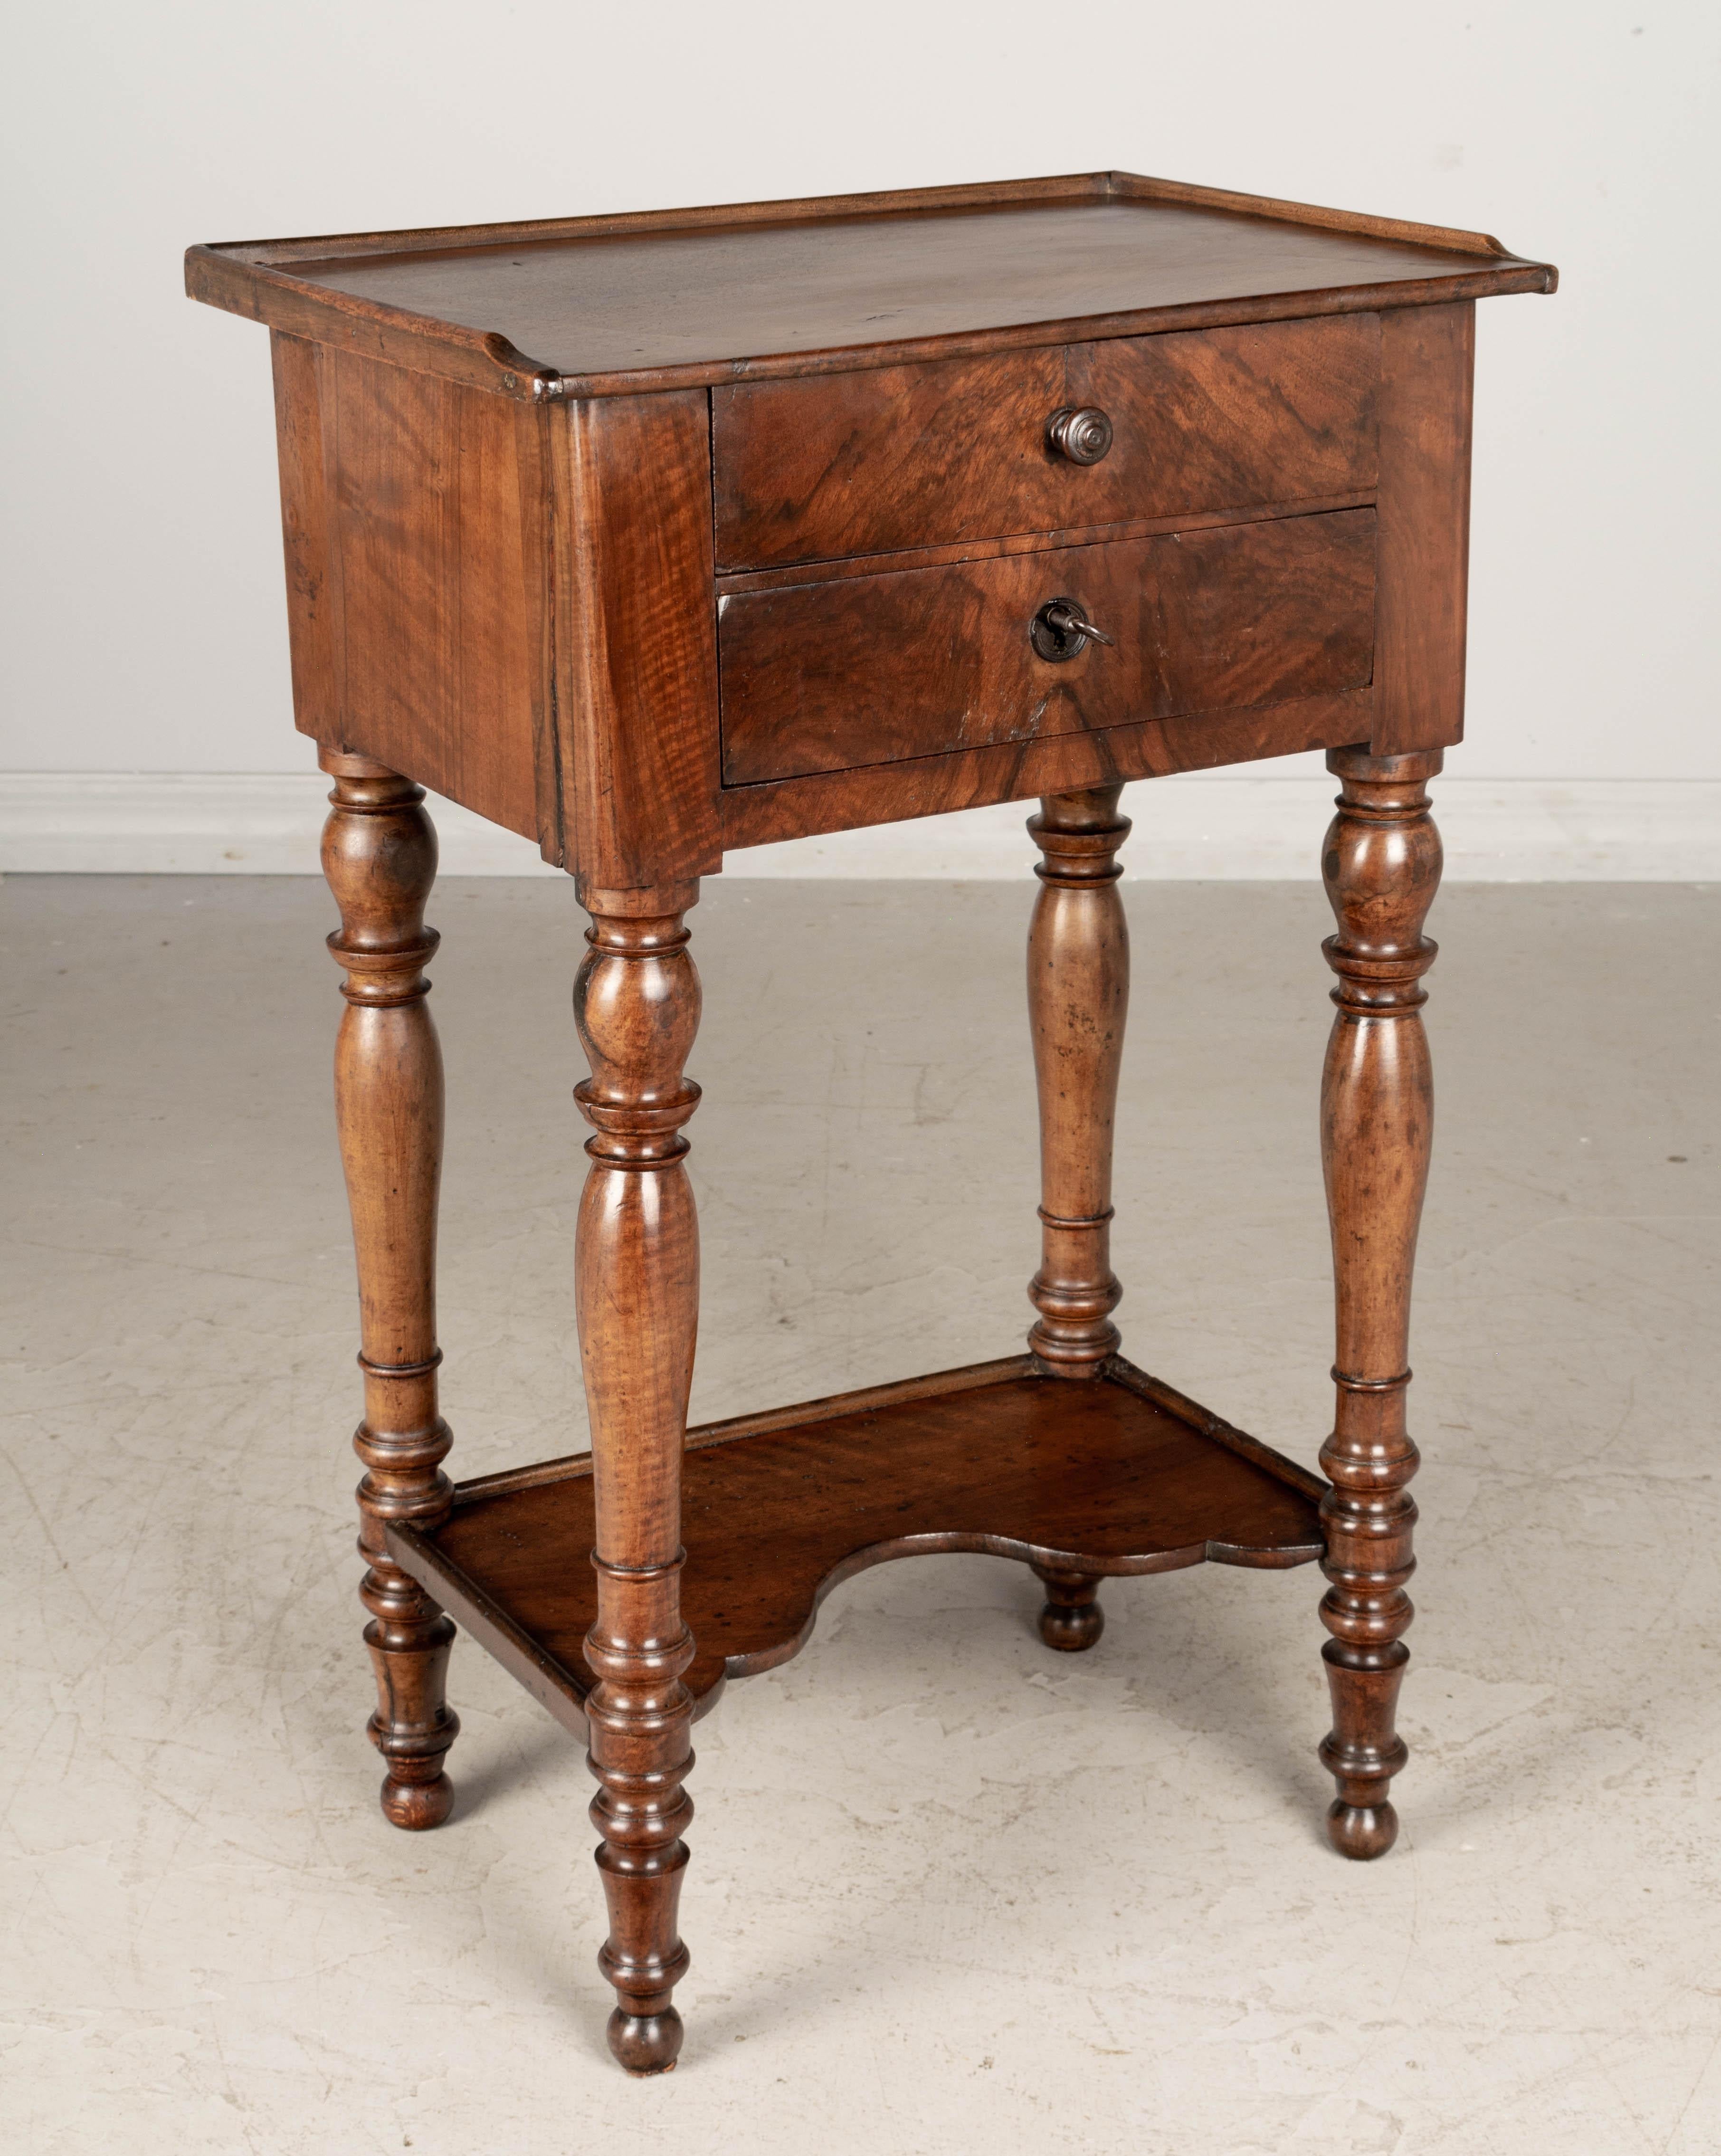 A 19th Century Louis Philippe walnut side table with two dovetailed drawers, turned legs and a lower shelf. Beautiful woodgrain with book-matched drawer face. Finished on all four sides. Top drawer has small wood knob and bottom drawer has a working